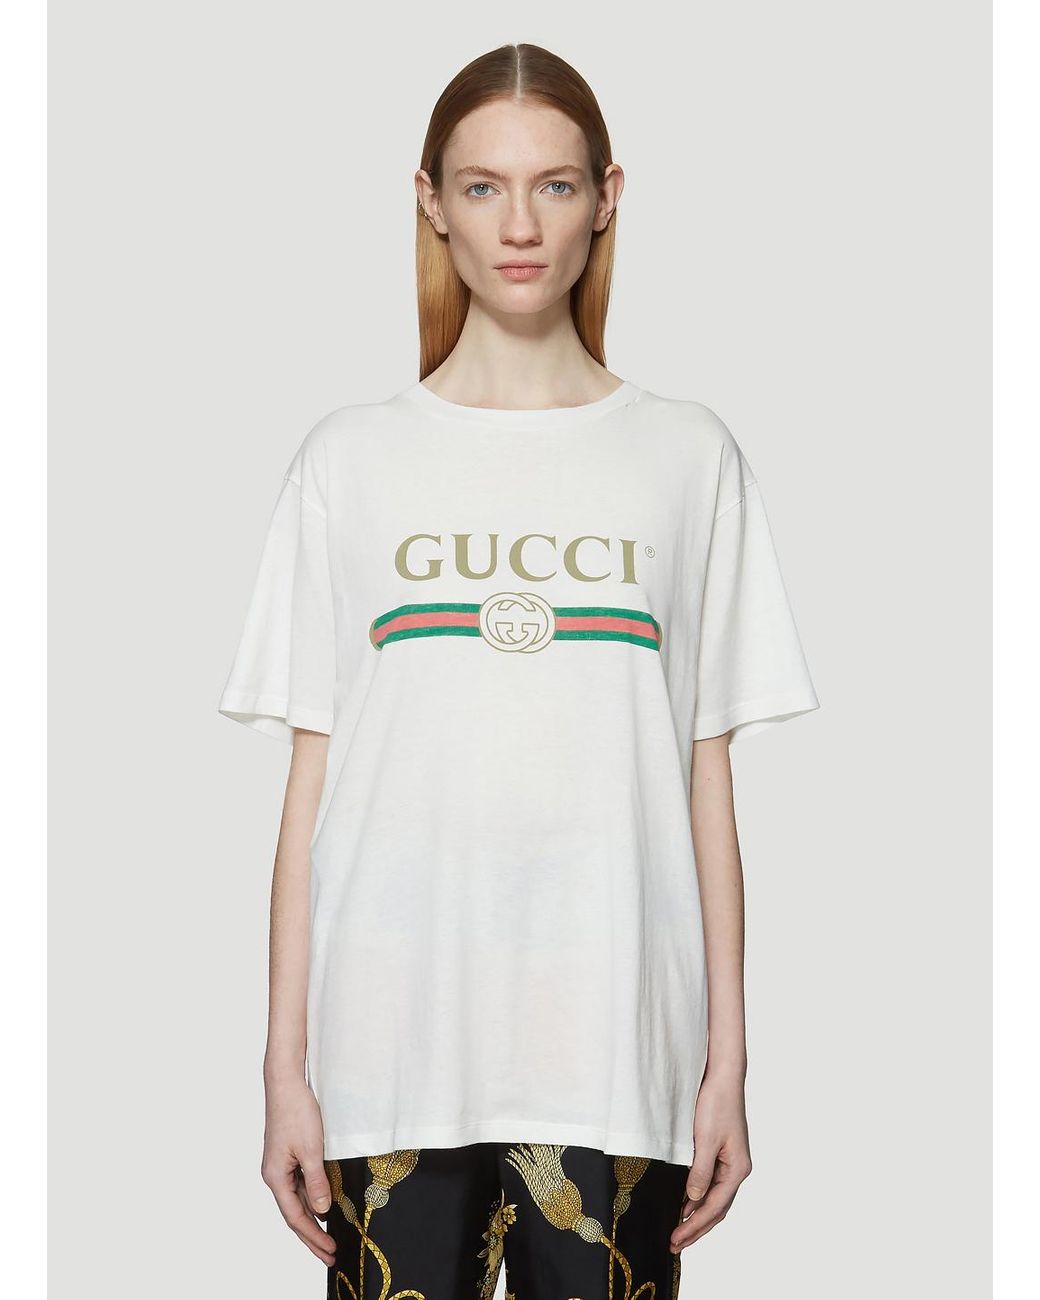 Gucci Fake Logo Printed Cotton Jersey T-shirt in White - Save 40% - Lyst